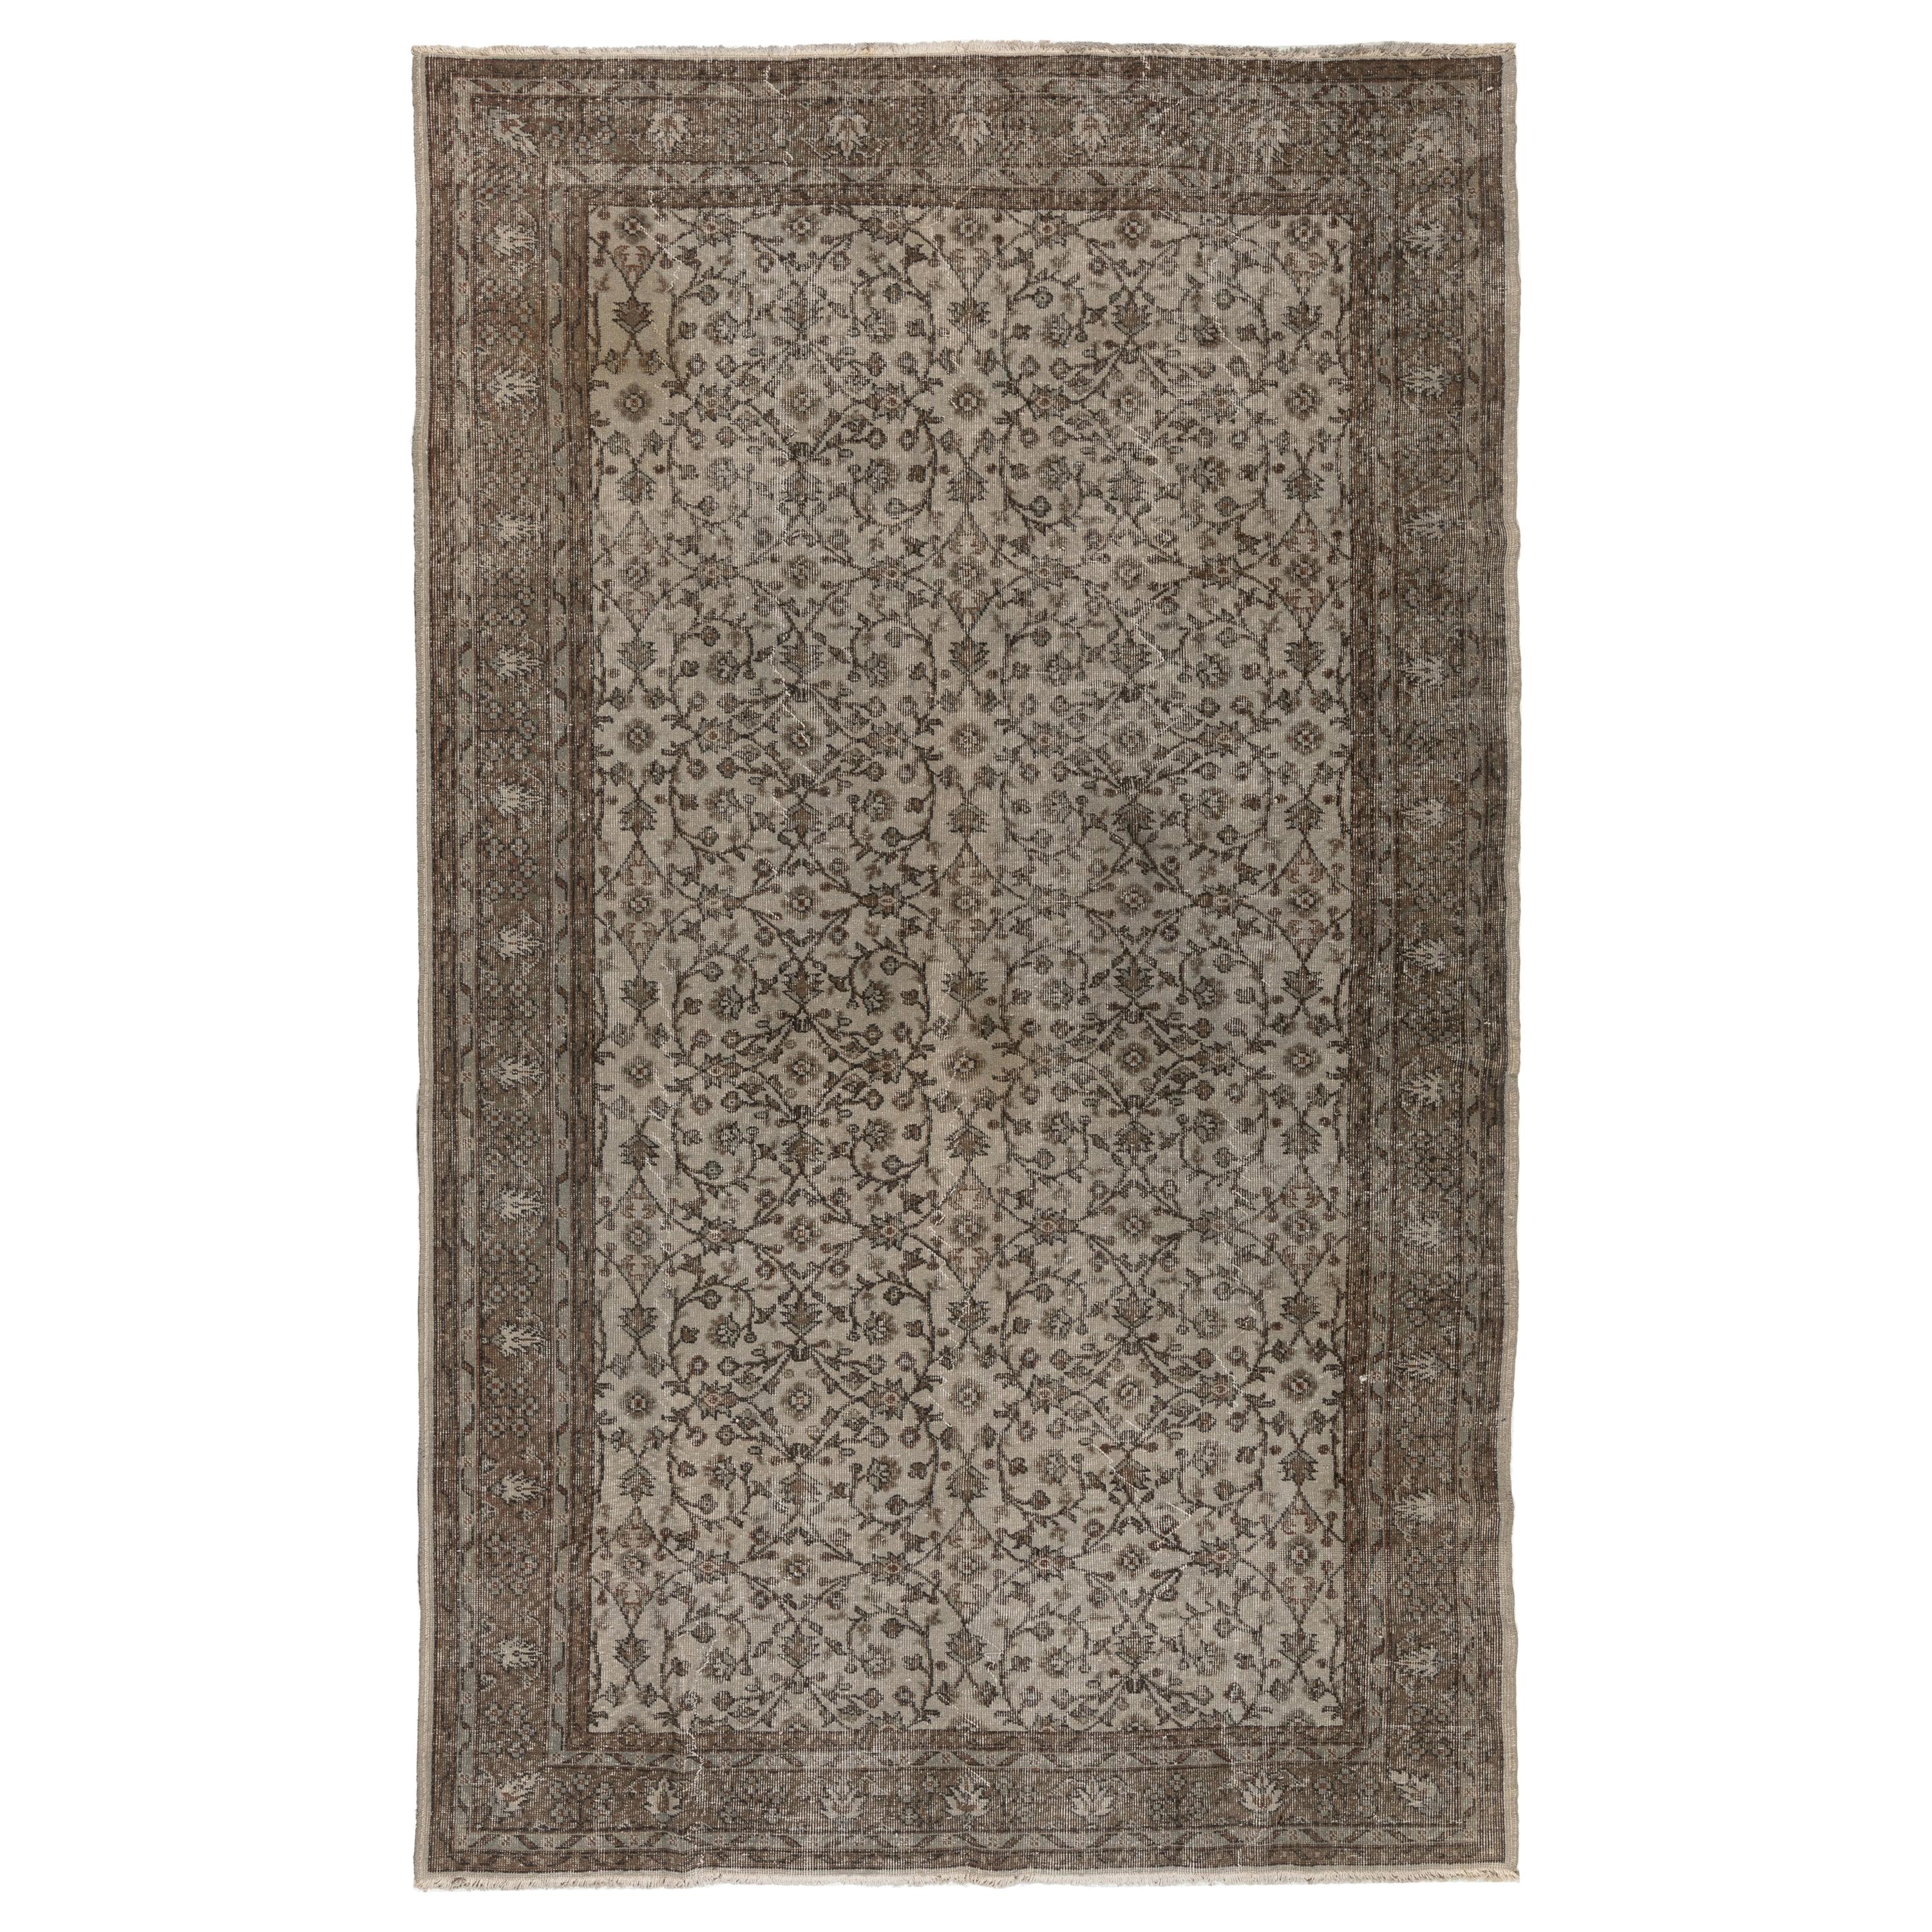 7x11 Ft Handmade Vintage Anatolian Area Rug. Floral Modern Wool Carpet in Gray For Sale